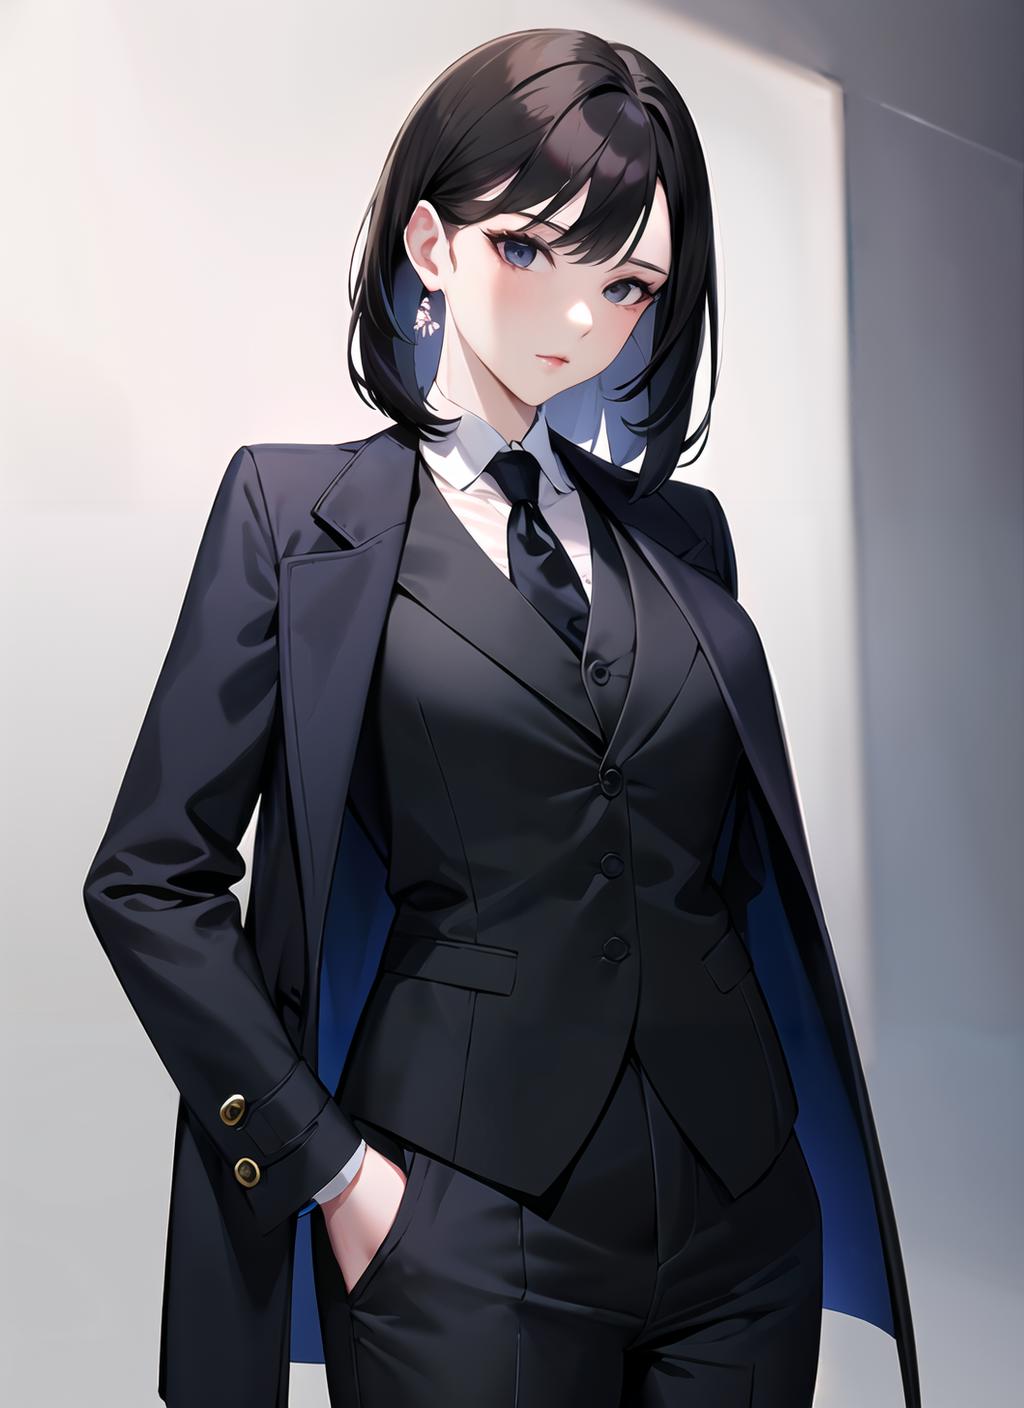 HD wallpaper: female anime character wearing blue and black suit, anime  girls | Wallpaper Flare